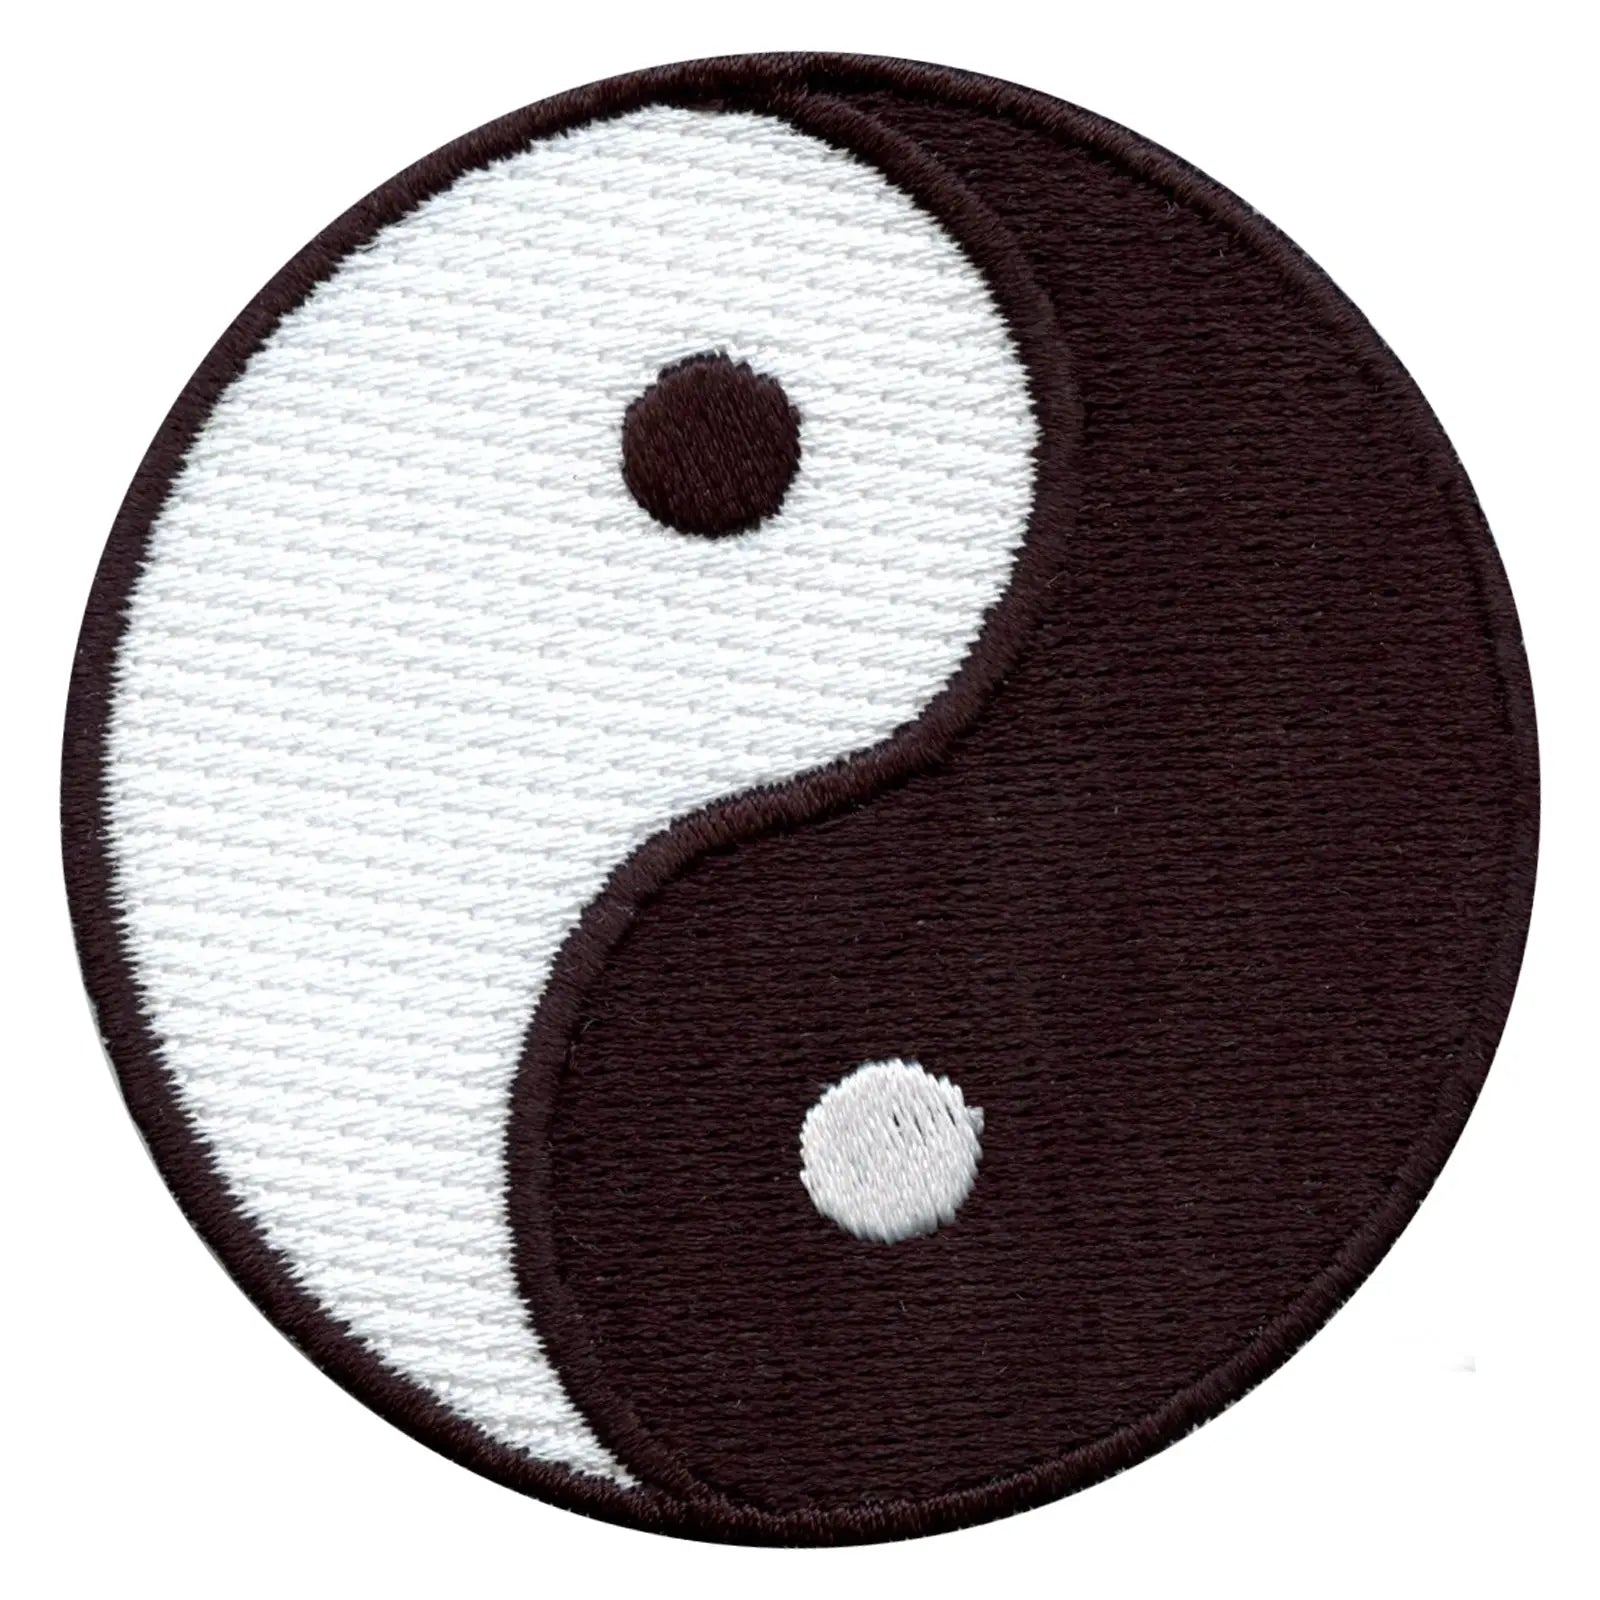 Yin Yang Symbol Embroidered Iron On Patch 